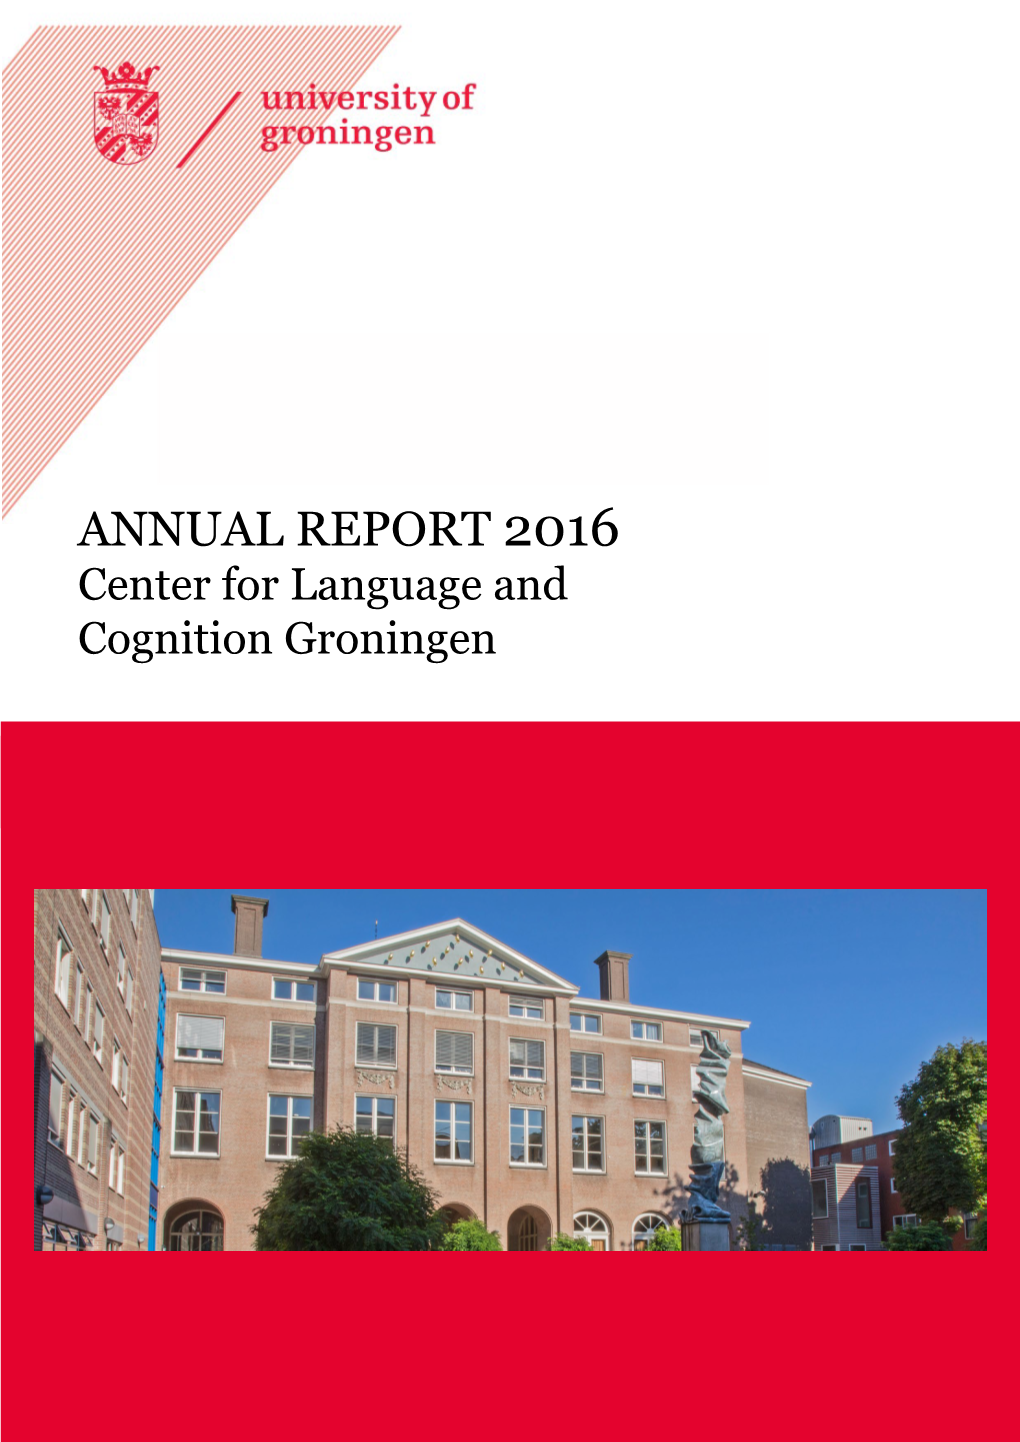 ANNUAL REPORT 2016 Center for Language and Cognition Groningen